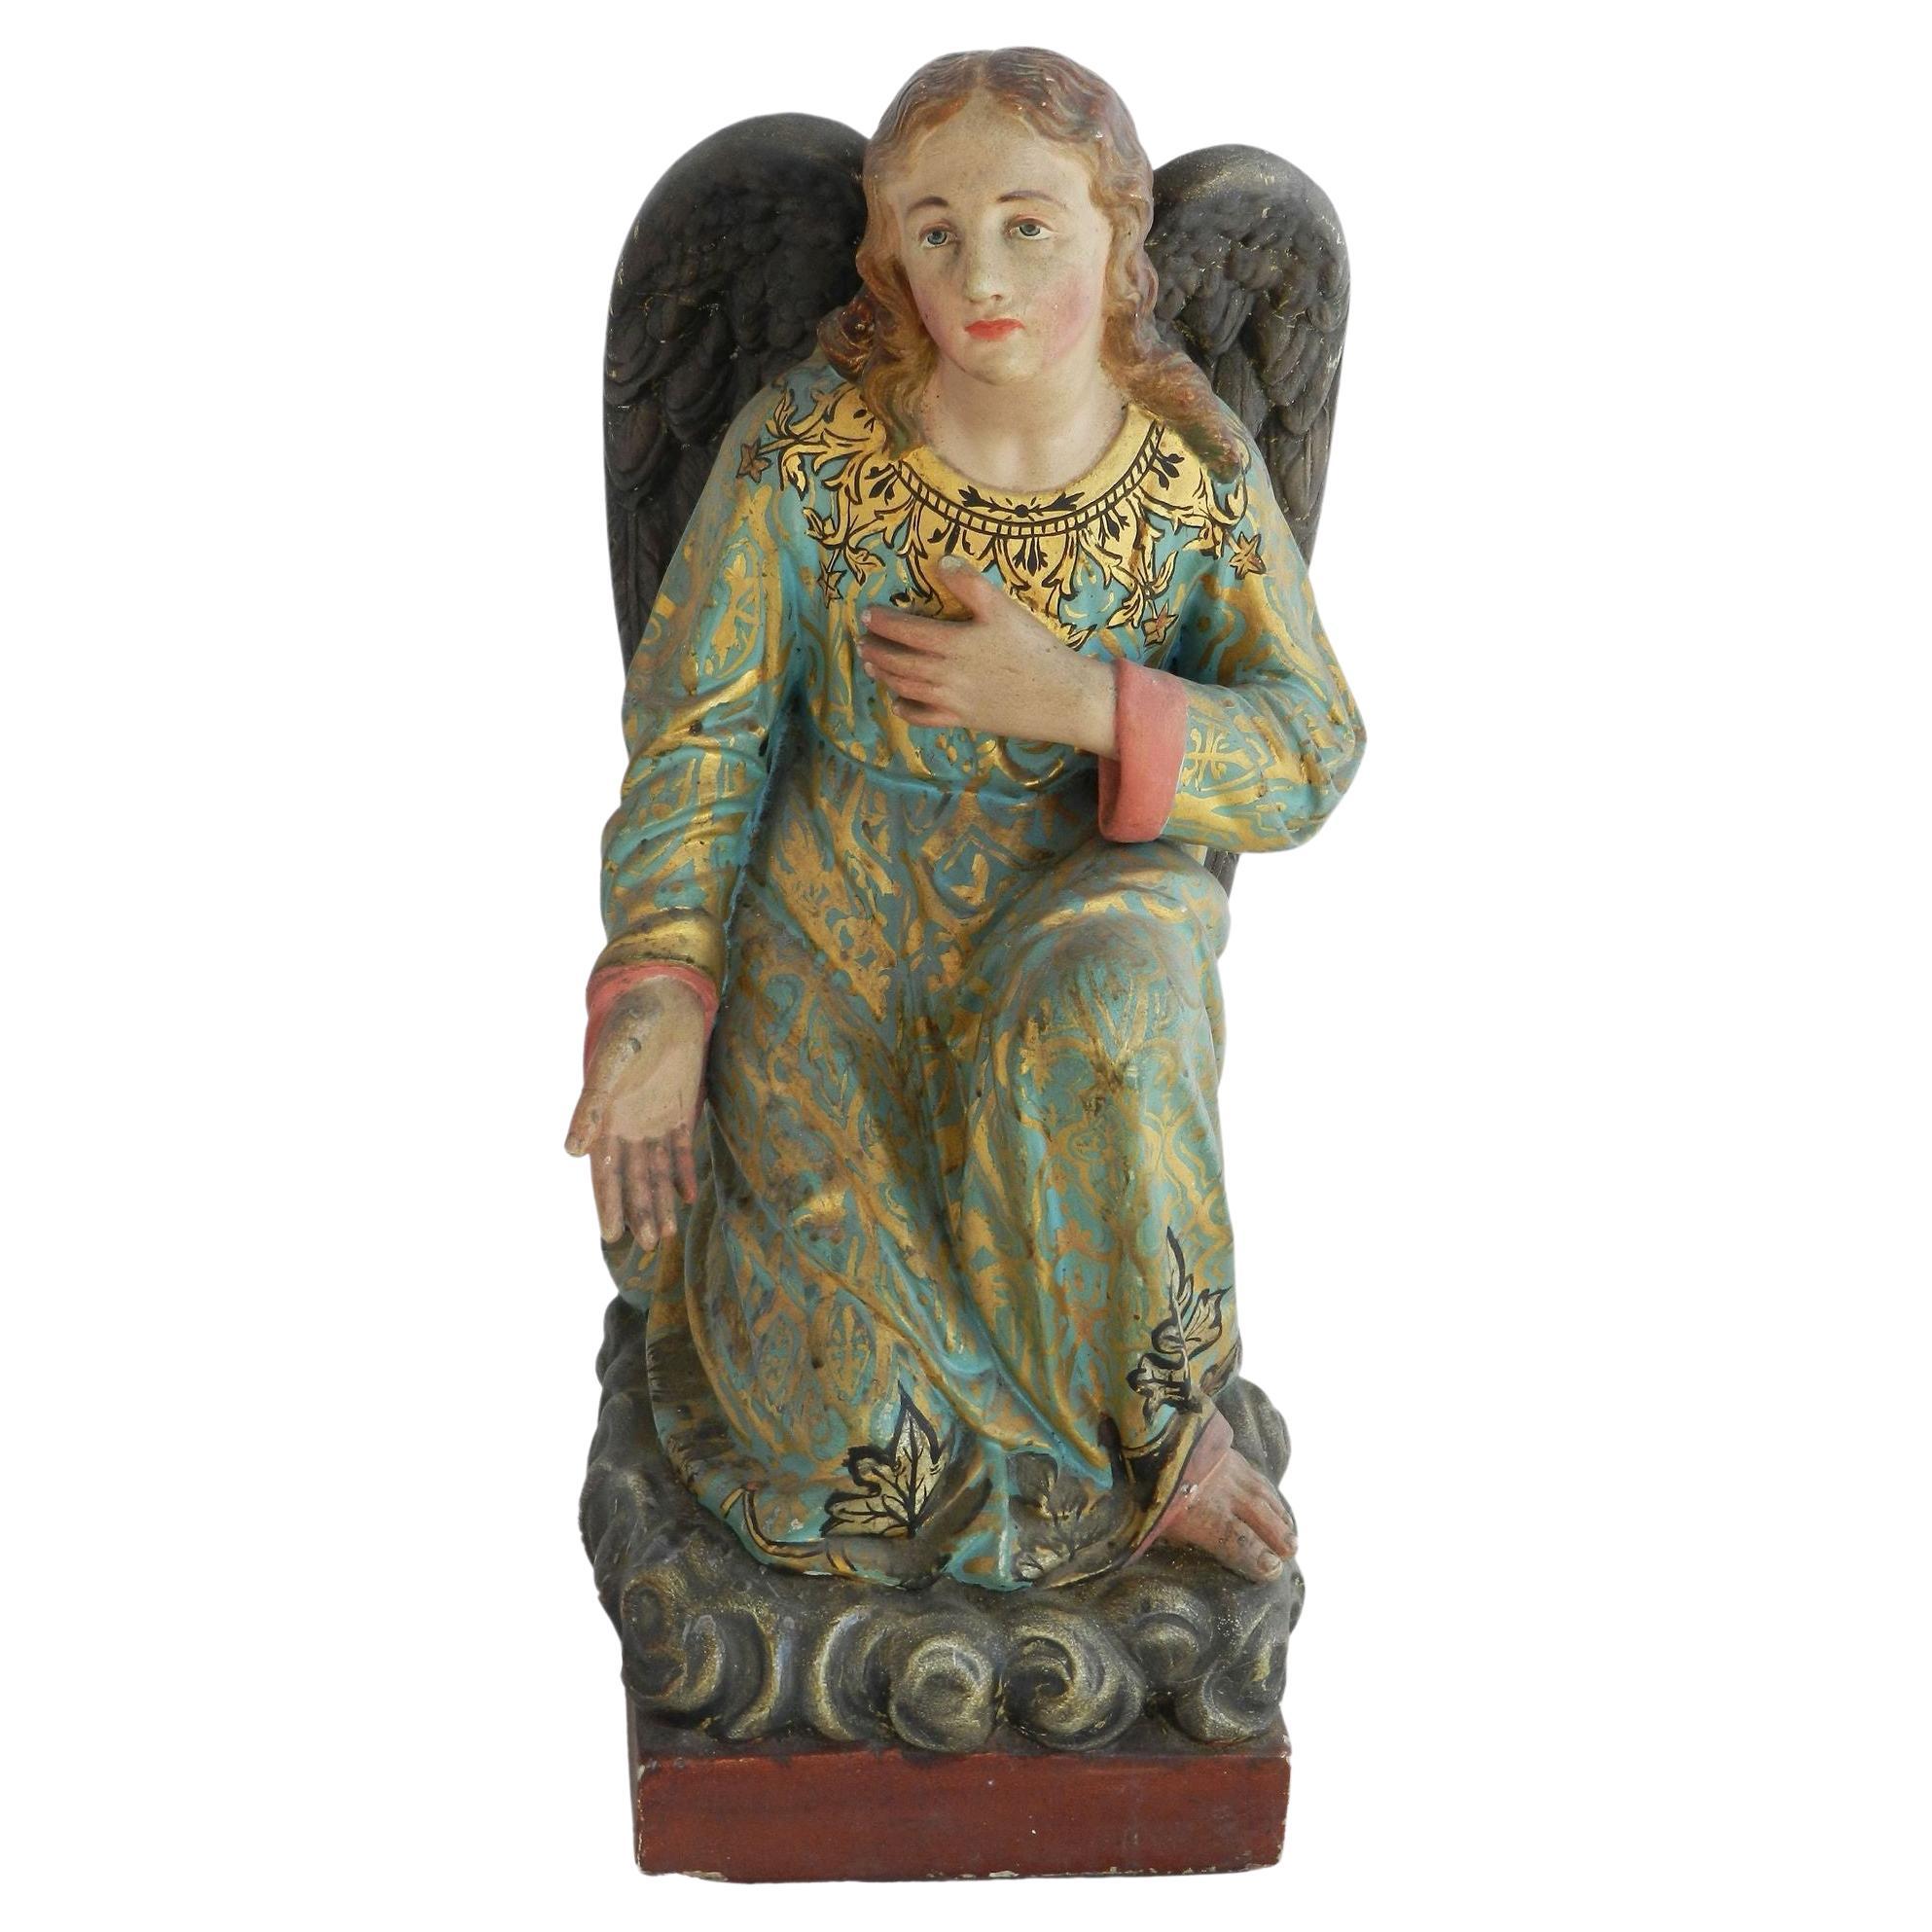 Antique Angel Statues - 4 For Sale on 1stDibs